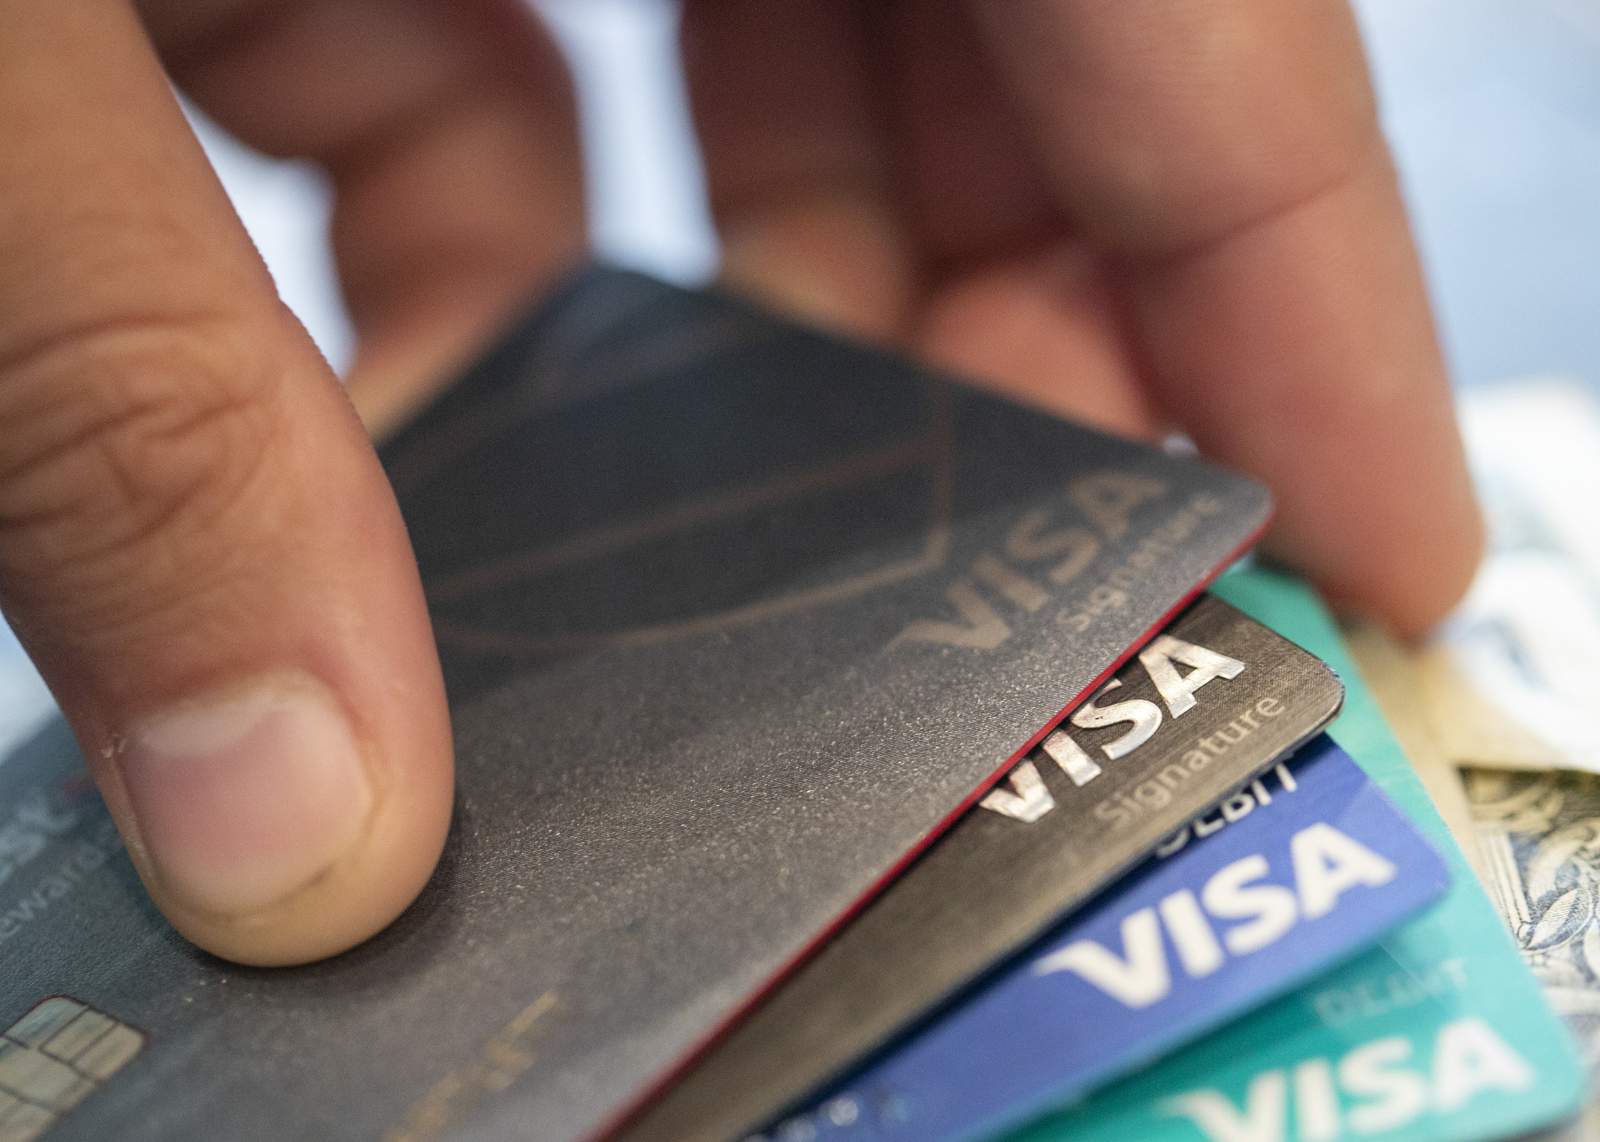 Americans can pay their credit card bills, but for how long?